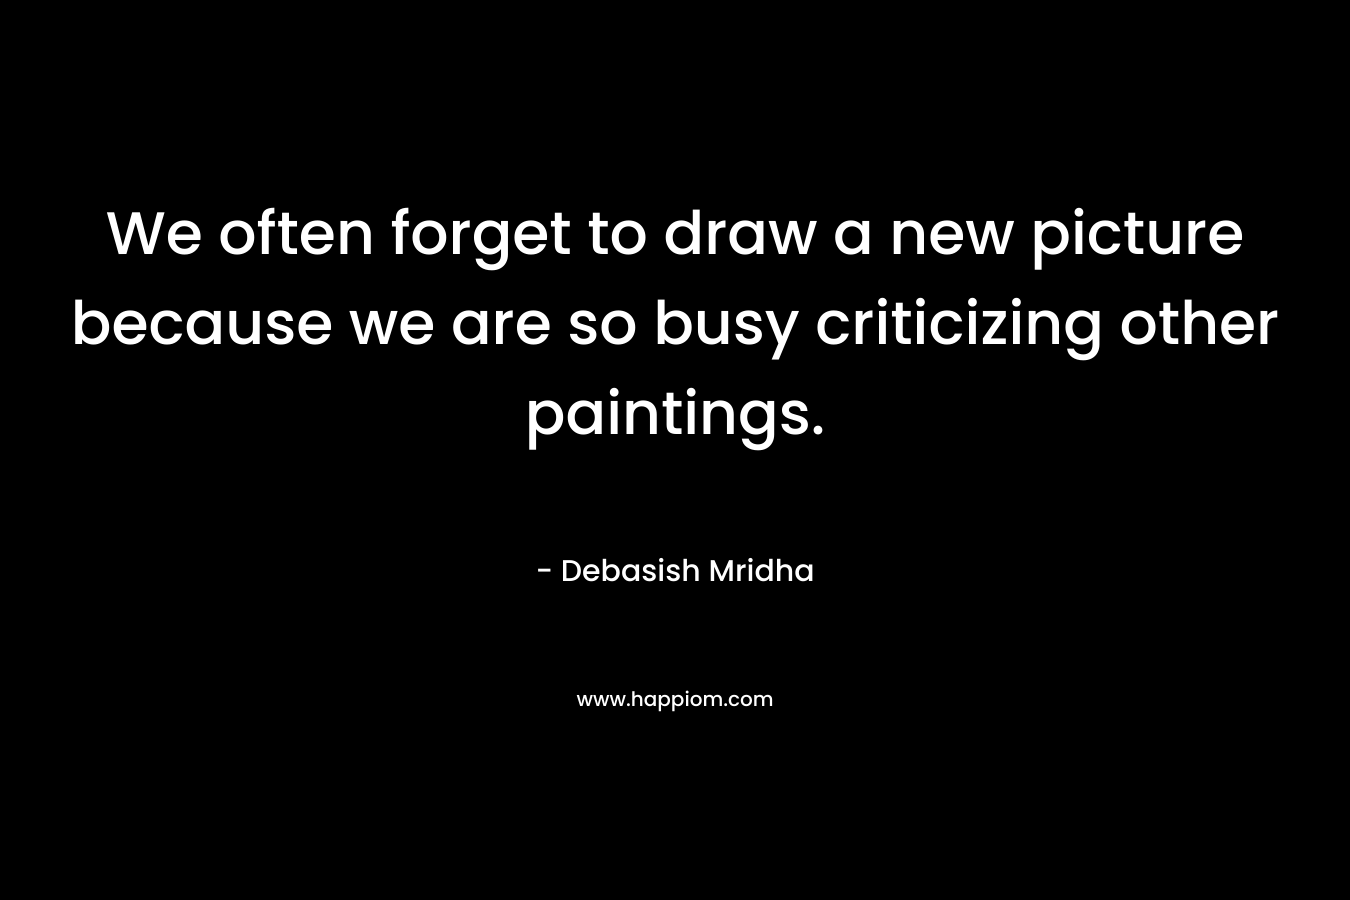 We often forget to draw a new picture because we are so busy criticizing other paintings. – Debasish Mridha